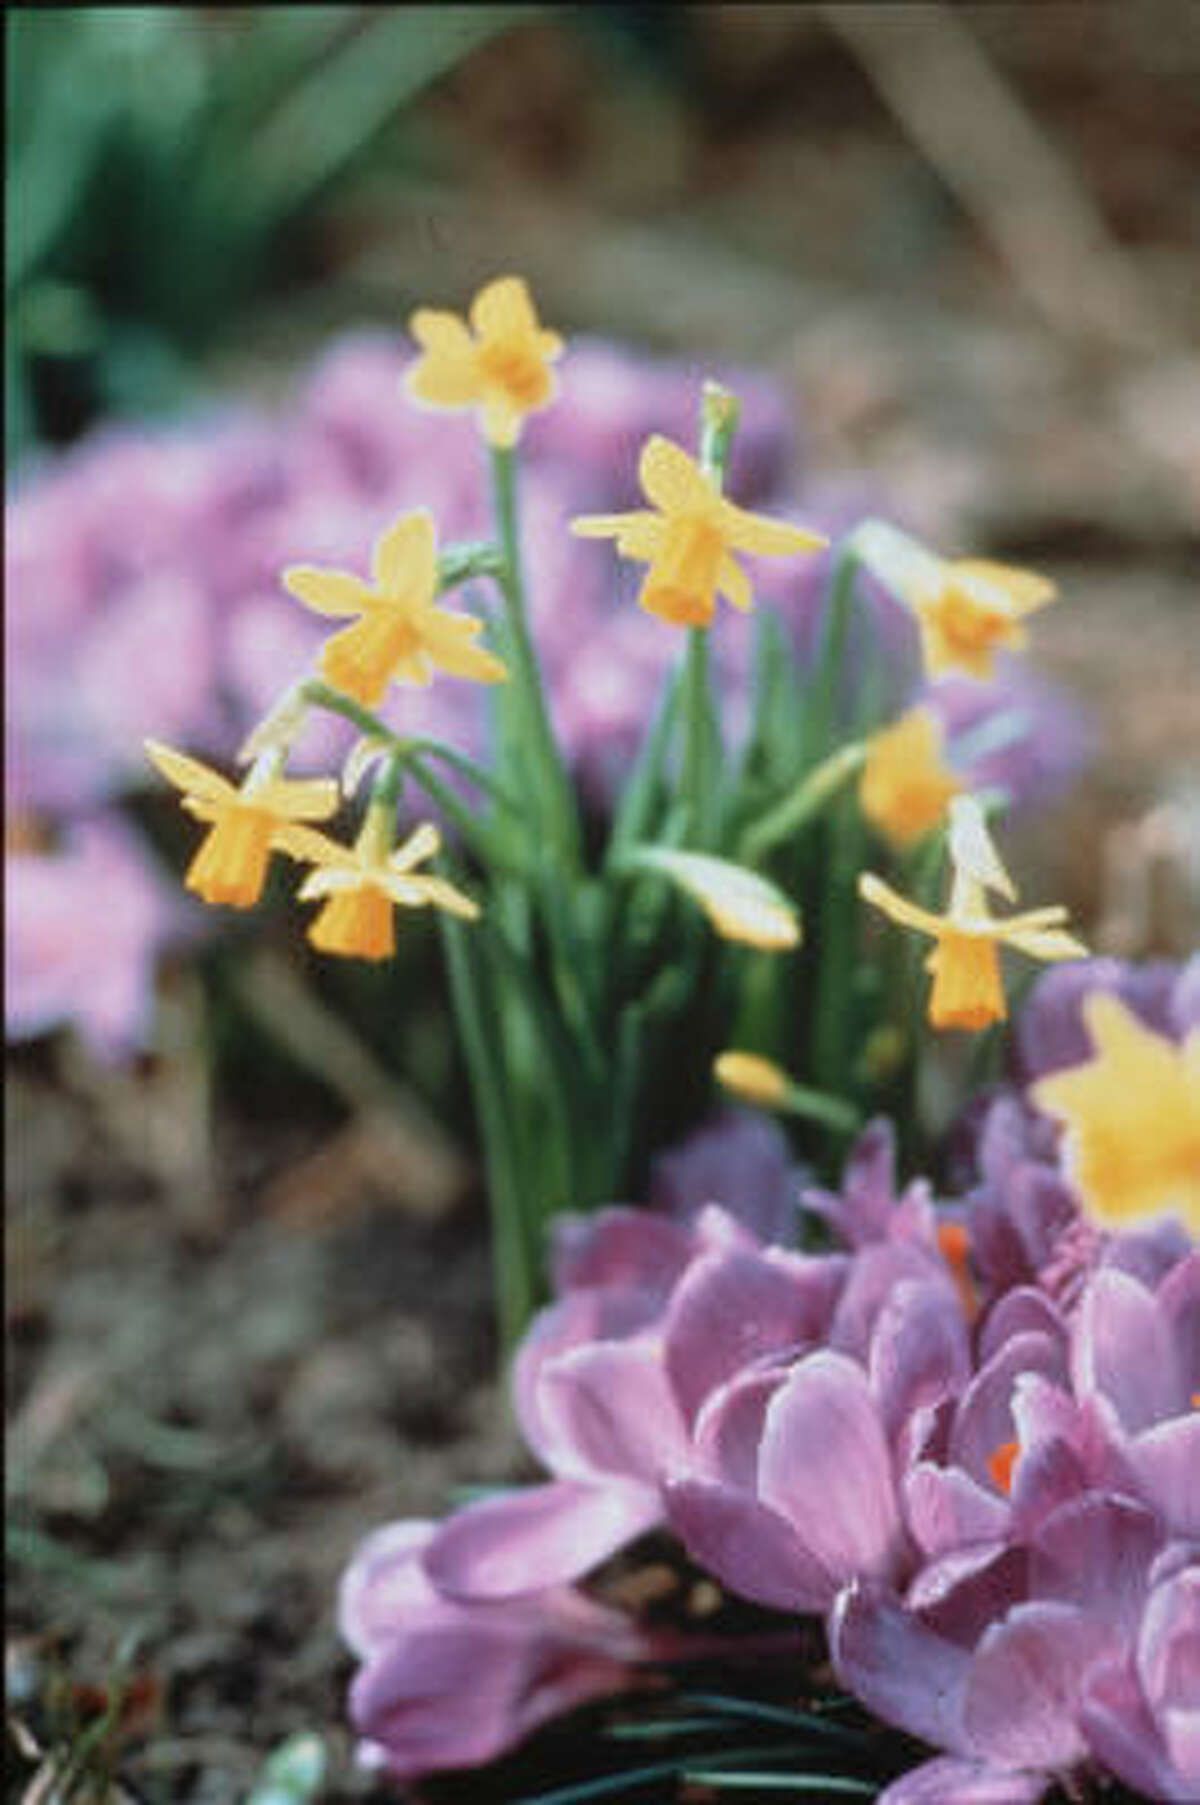 Delicate yellow daffodlis can make a lovely garden counterpoint to purple crocuses.